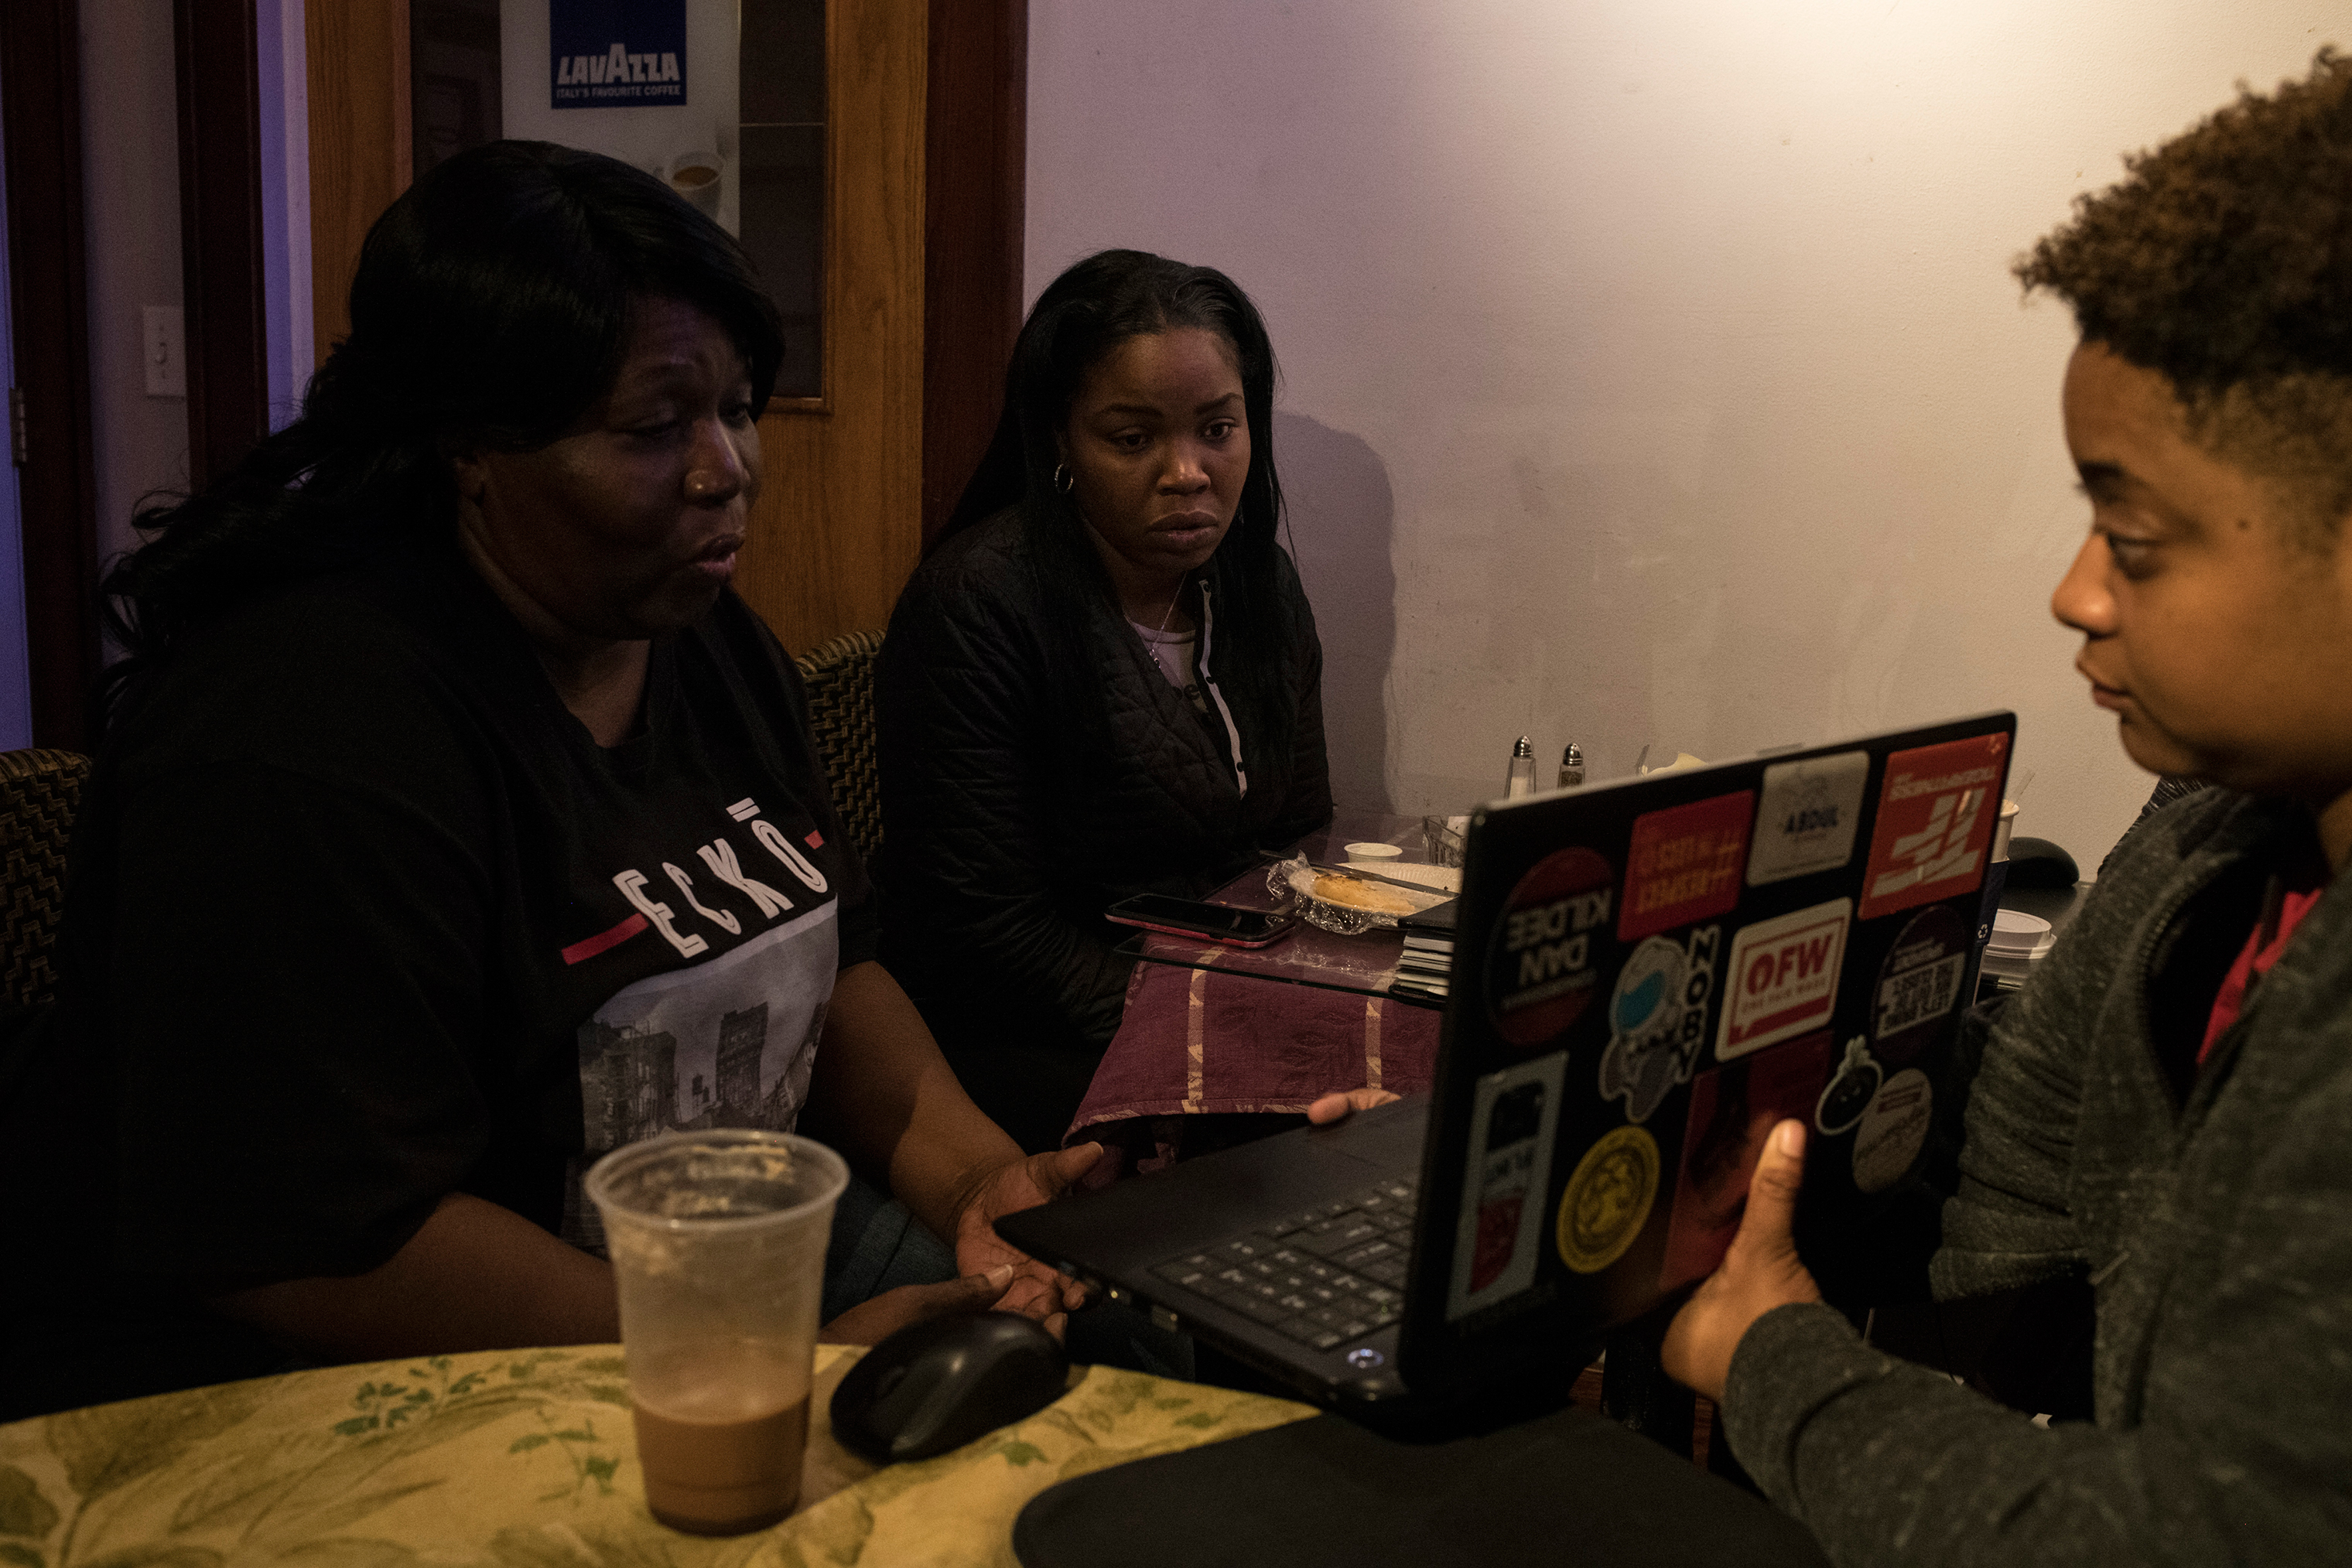 Hawk joins a conference call with a non-profit alongside fellow Flint residents to discuss the needs of the city. (Brittany Greeson for TIME)